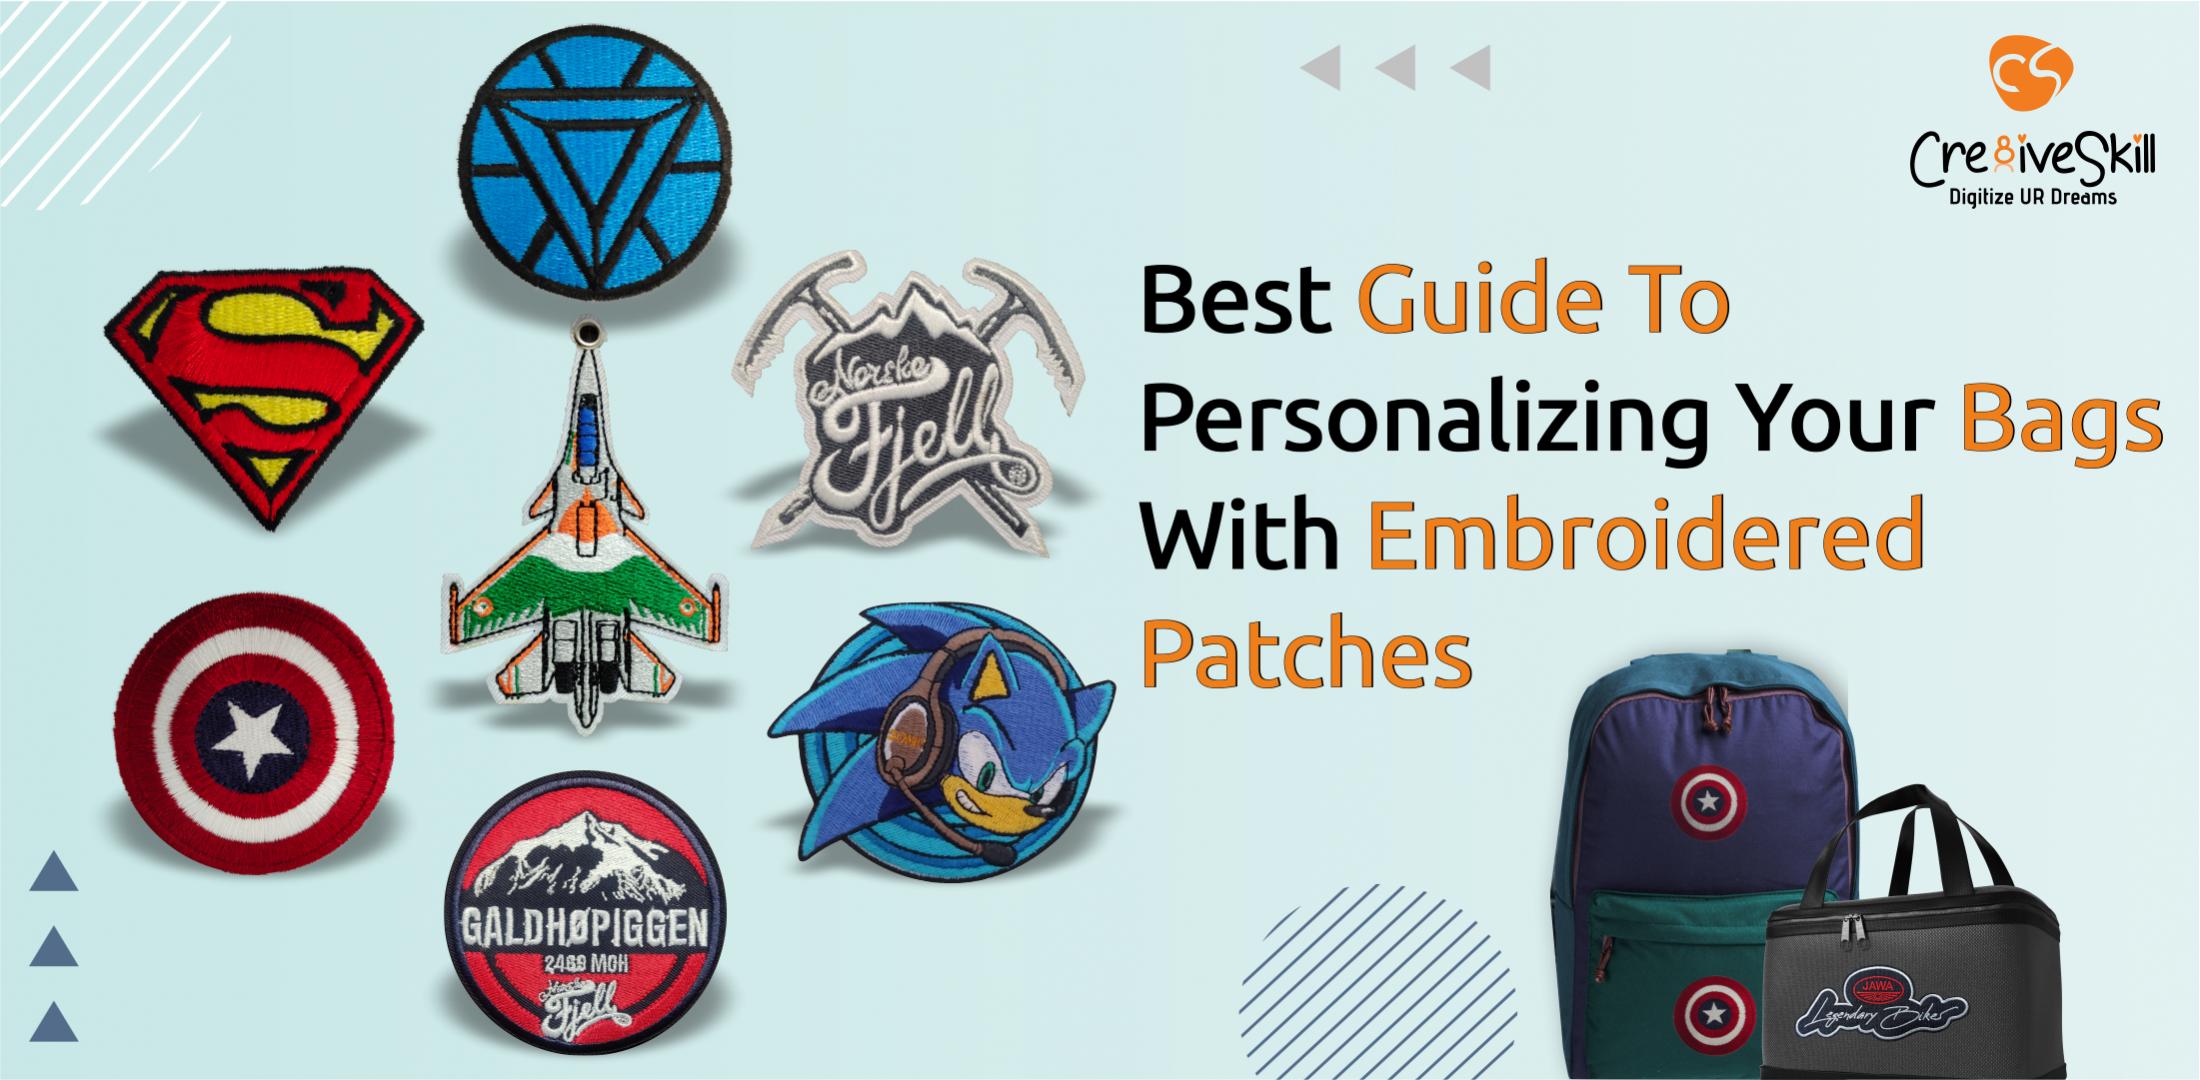 Best Guide To Personalizing Your Bags With Embroidered Patches - Cre8iveSkill